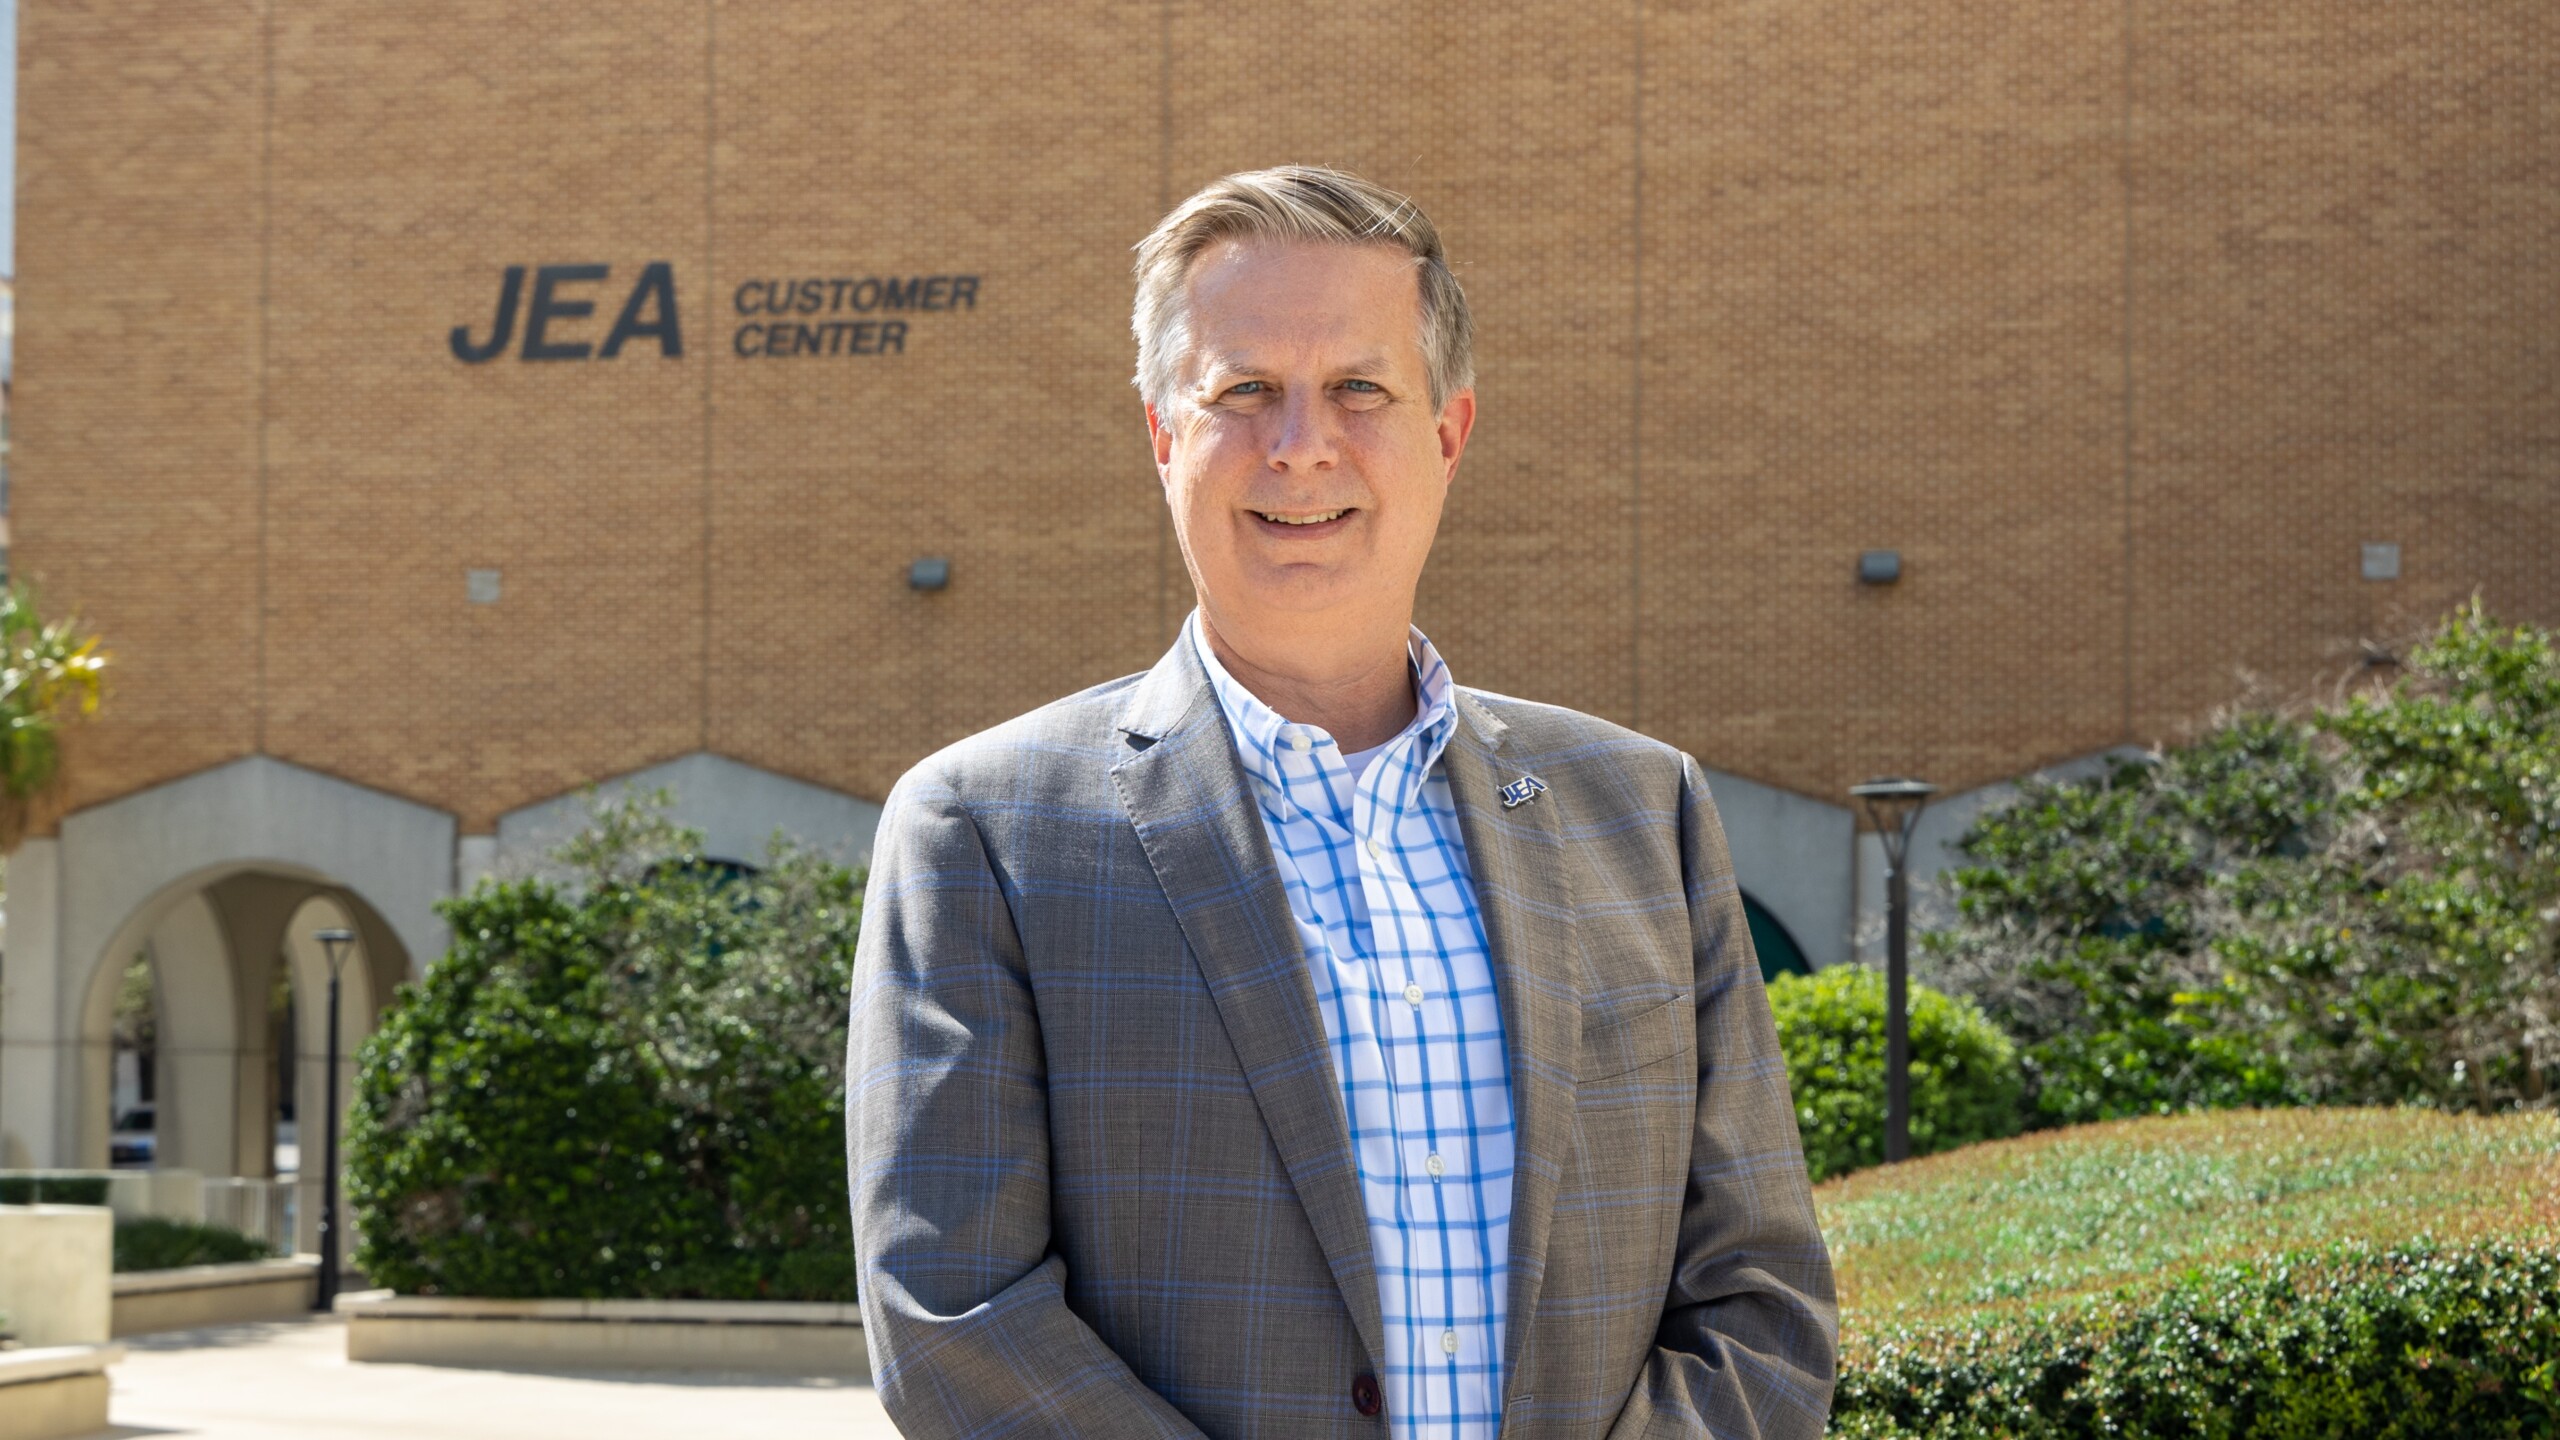 Featured image for “An ADAPT Q&A with Jay Stowe, CEO of JEA”